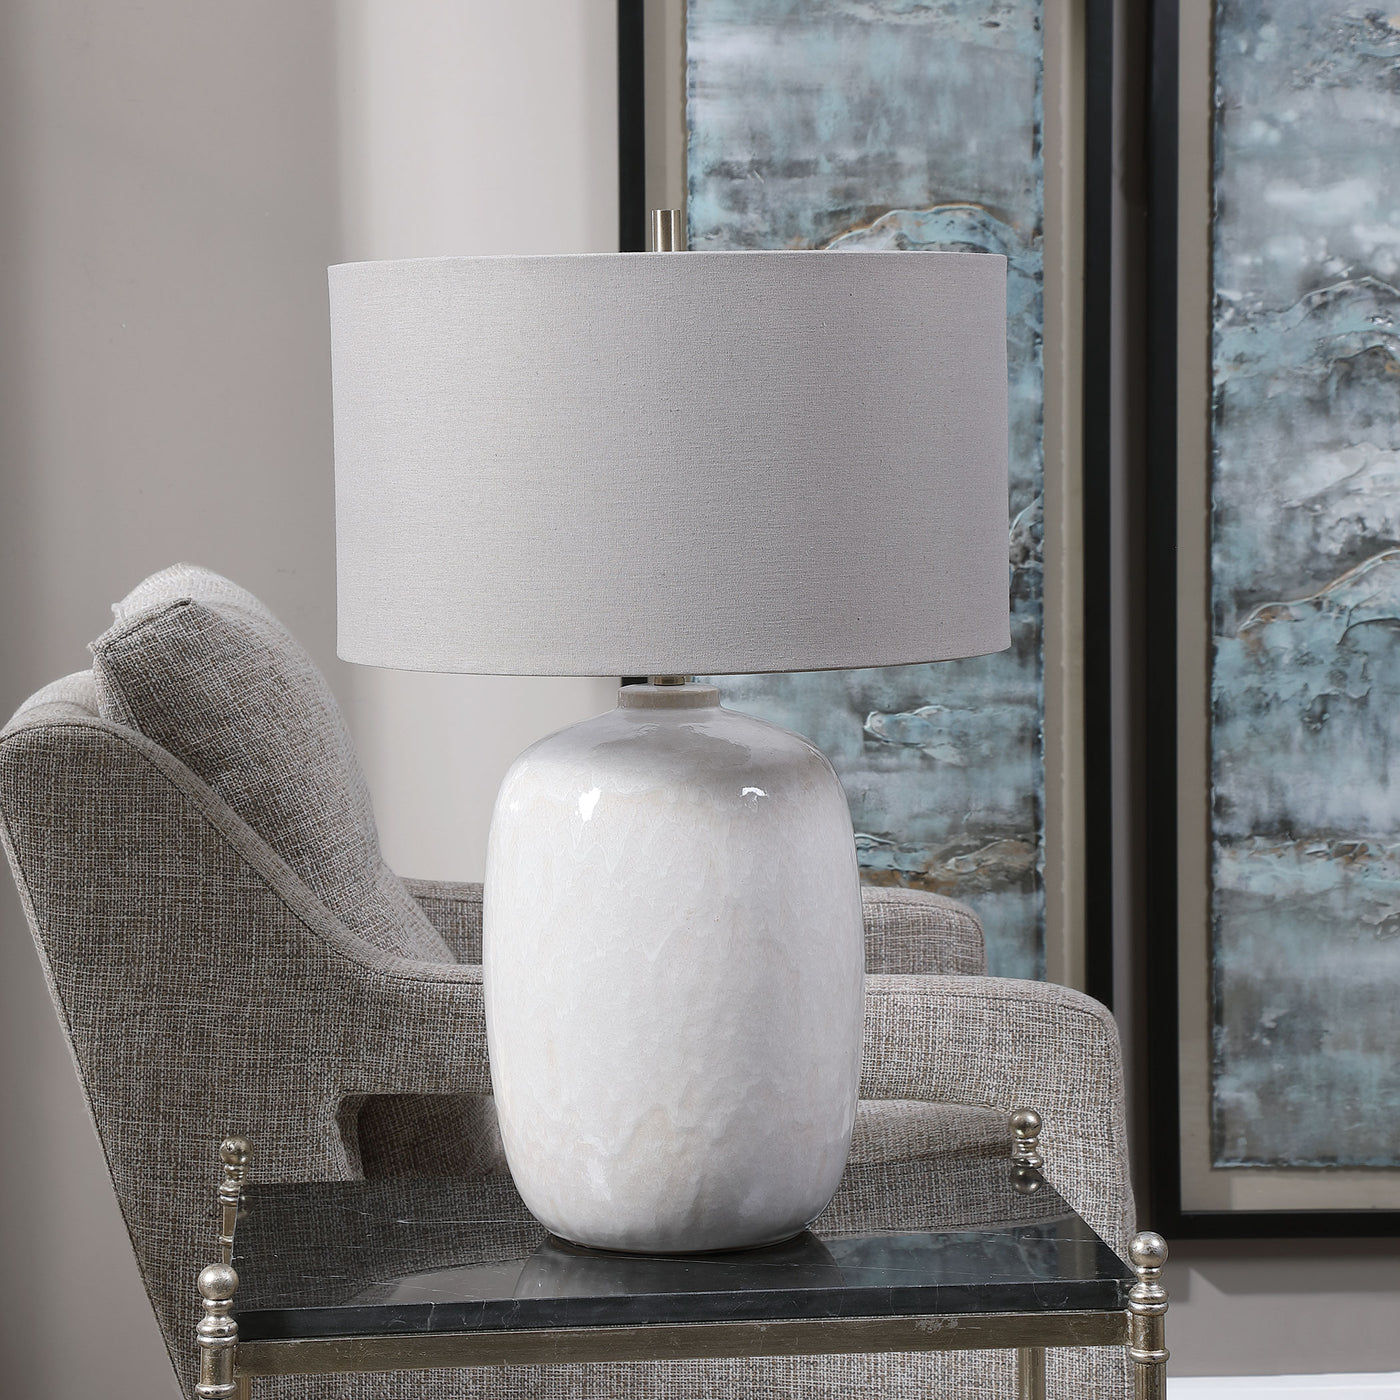 Simple Yet Versatile, This Ceramic Table Lamp Features A Cream-ivory Drip Glaze With Subtle Texture, Accented By Brushed N...